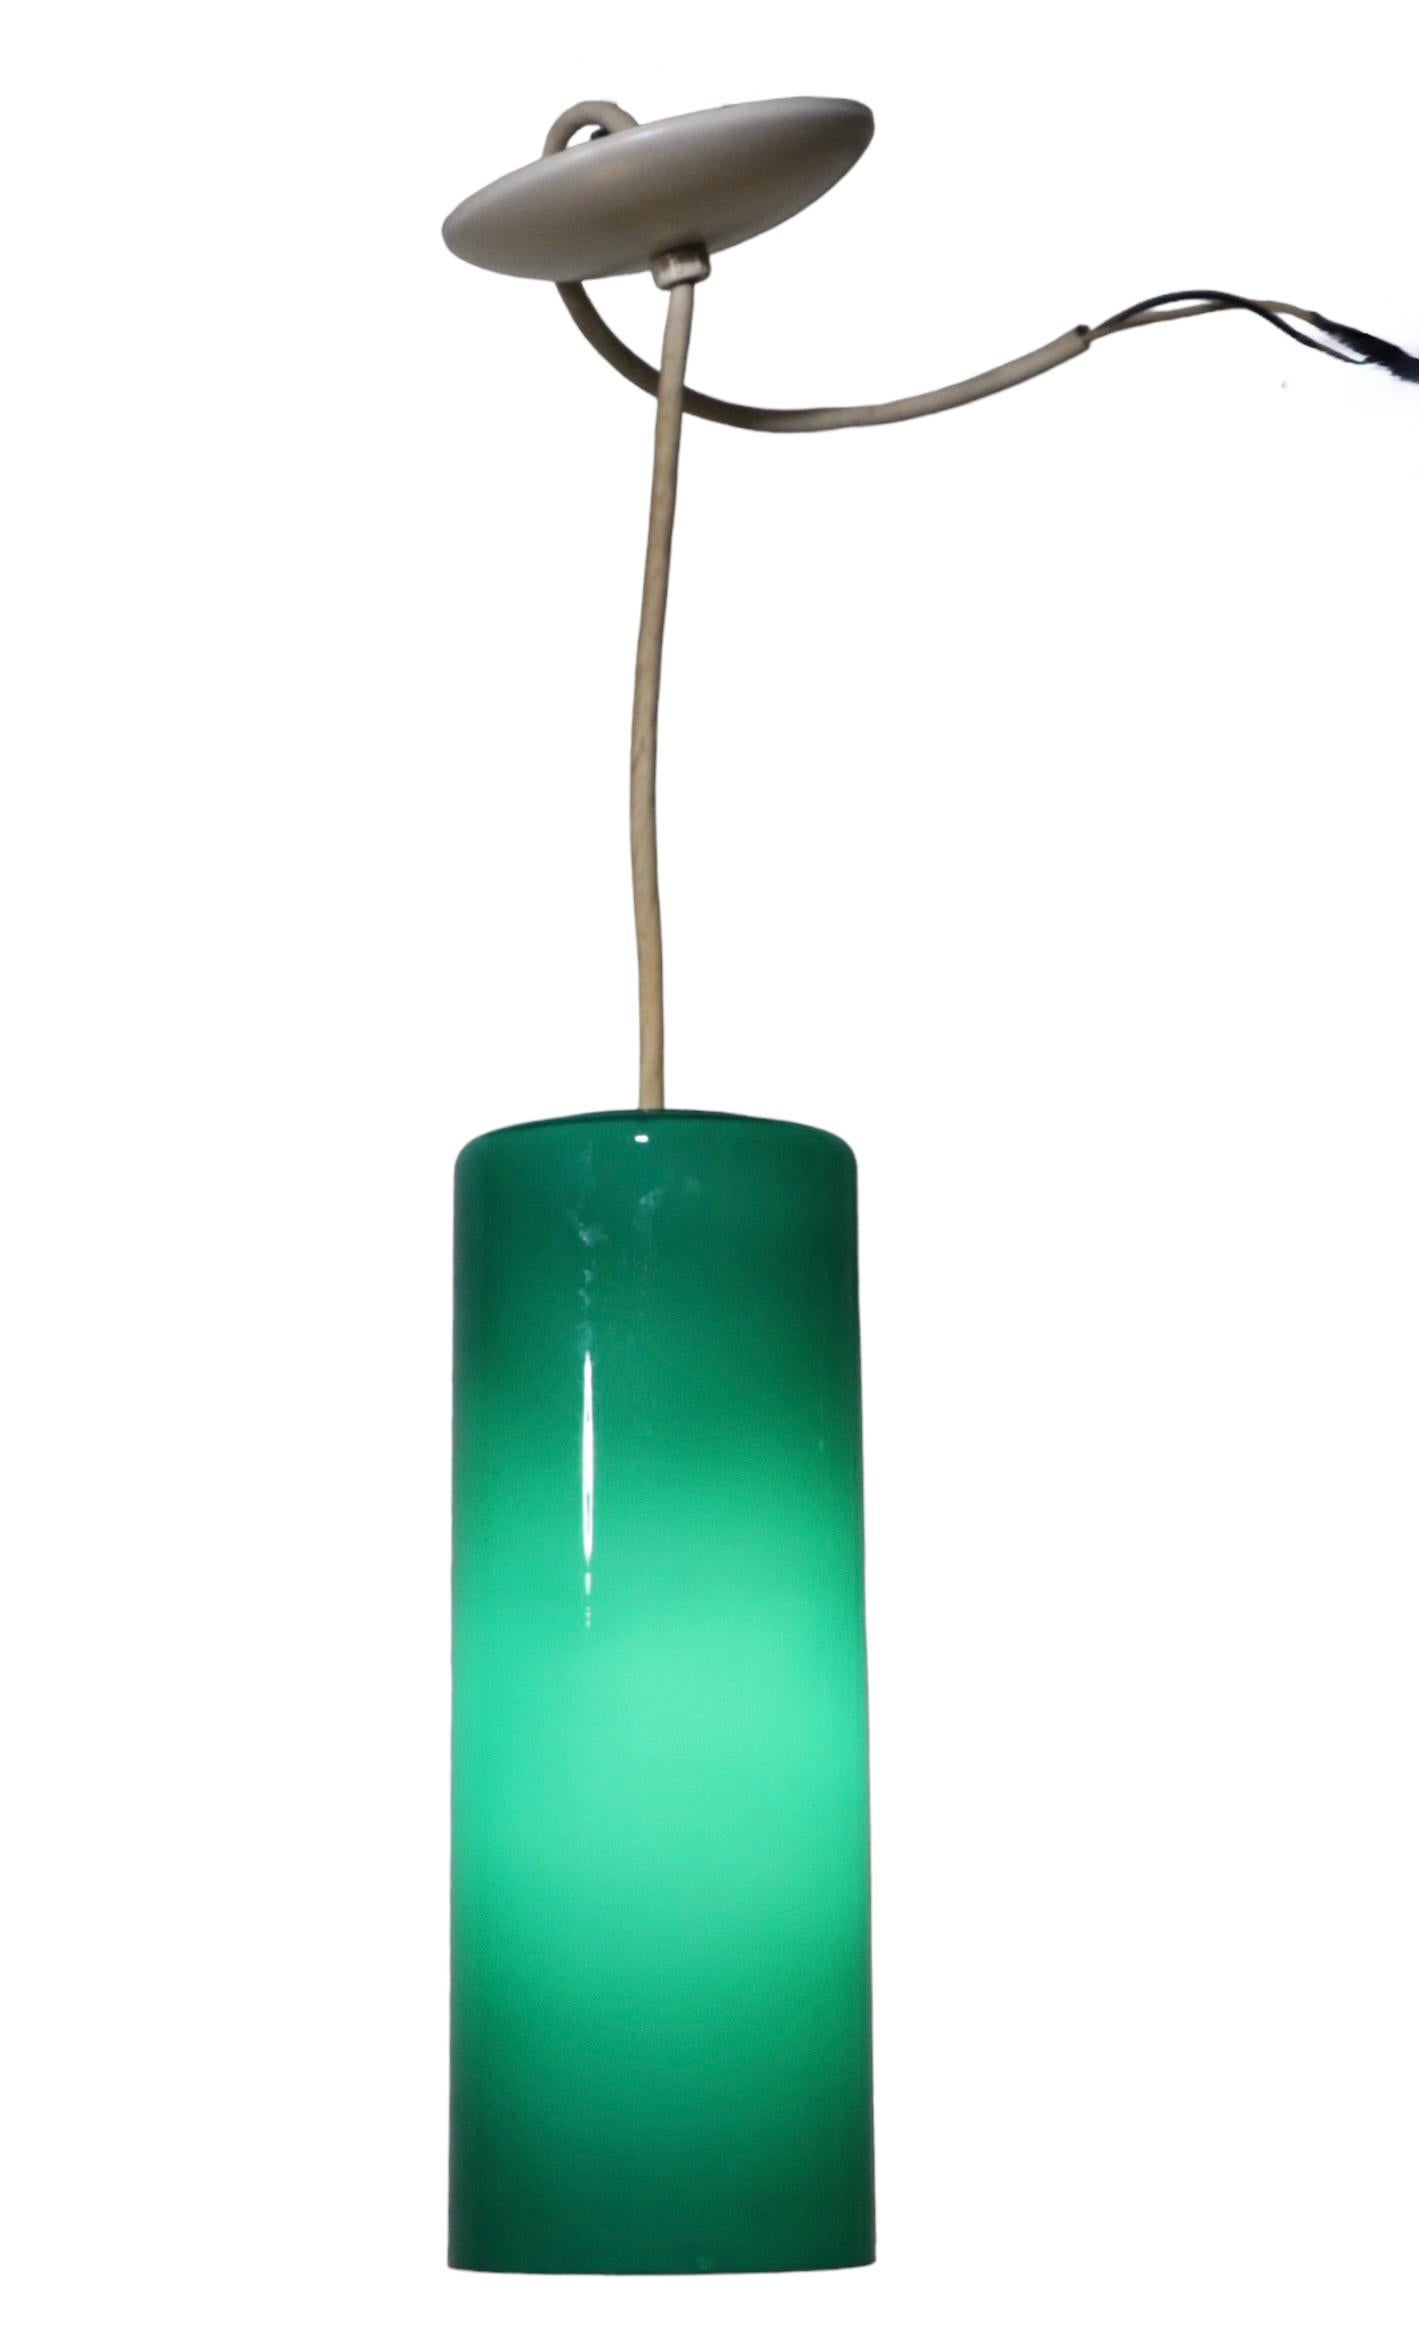 Prescolite Cylinder Pendant Chandelier in Green Glass, C 1950 - 1970's For Sale 4